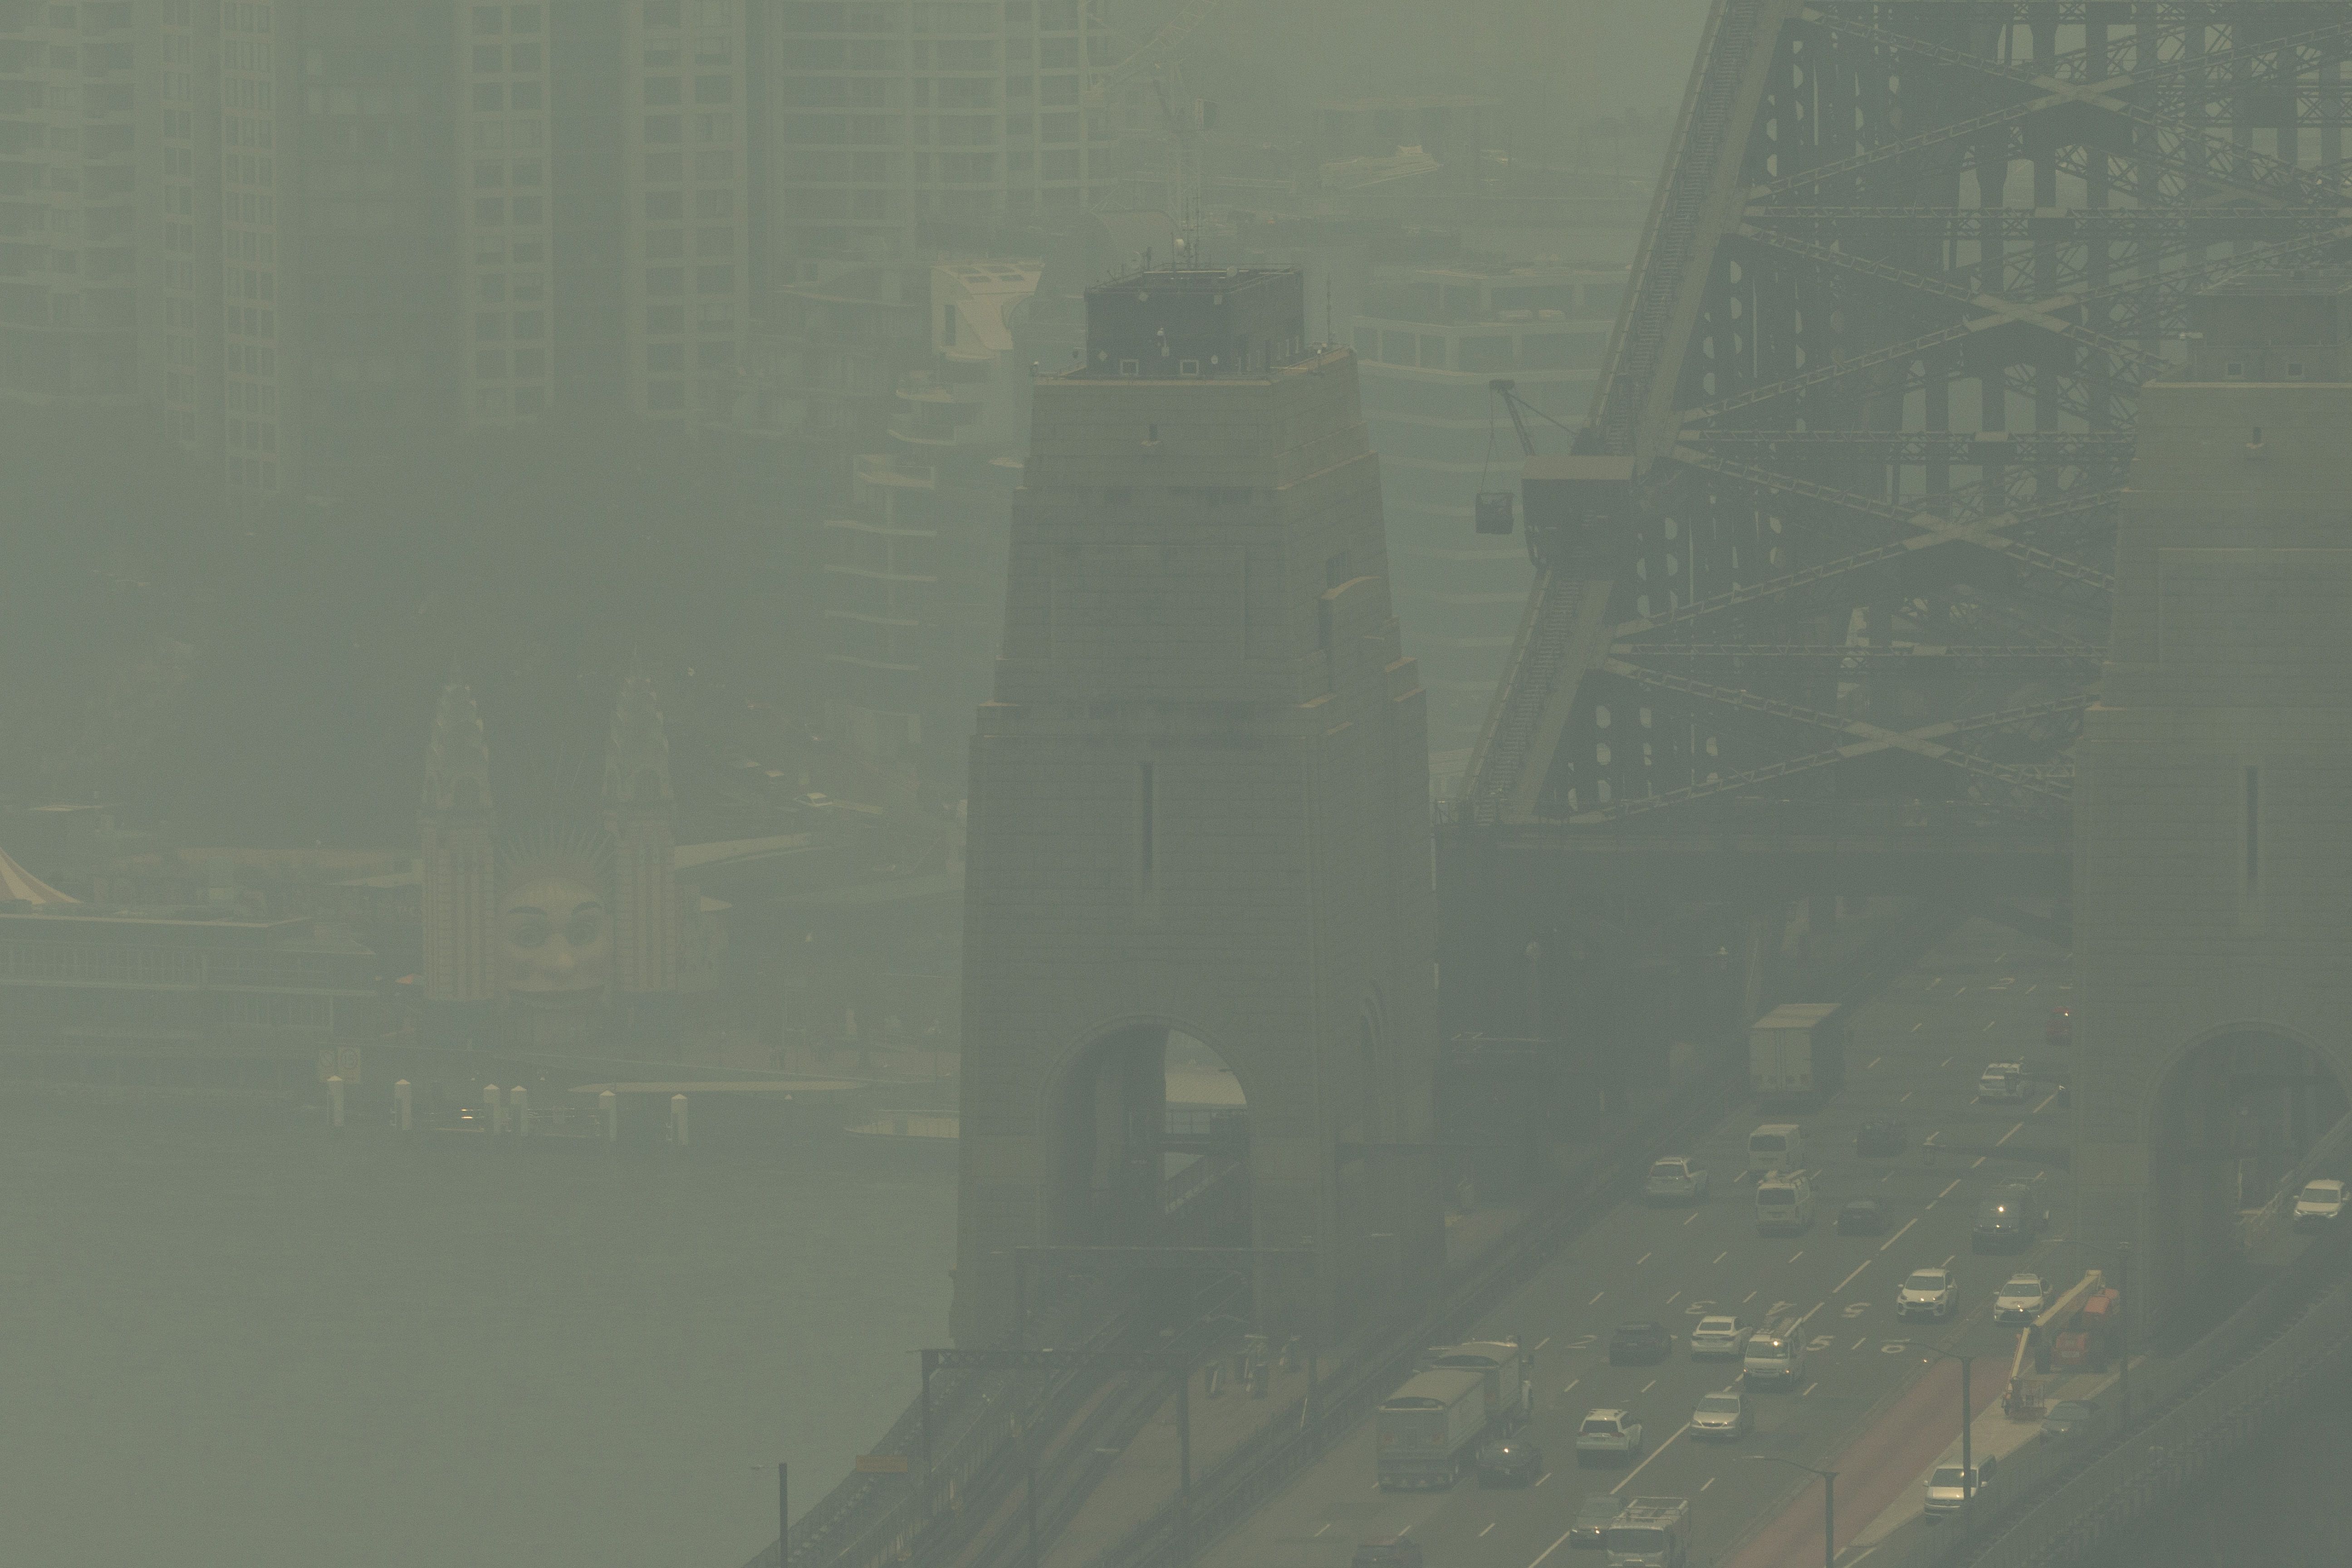 Sydney Harbour Bridge and North Sydney are covered in a blanket of smoke on December 19